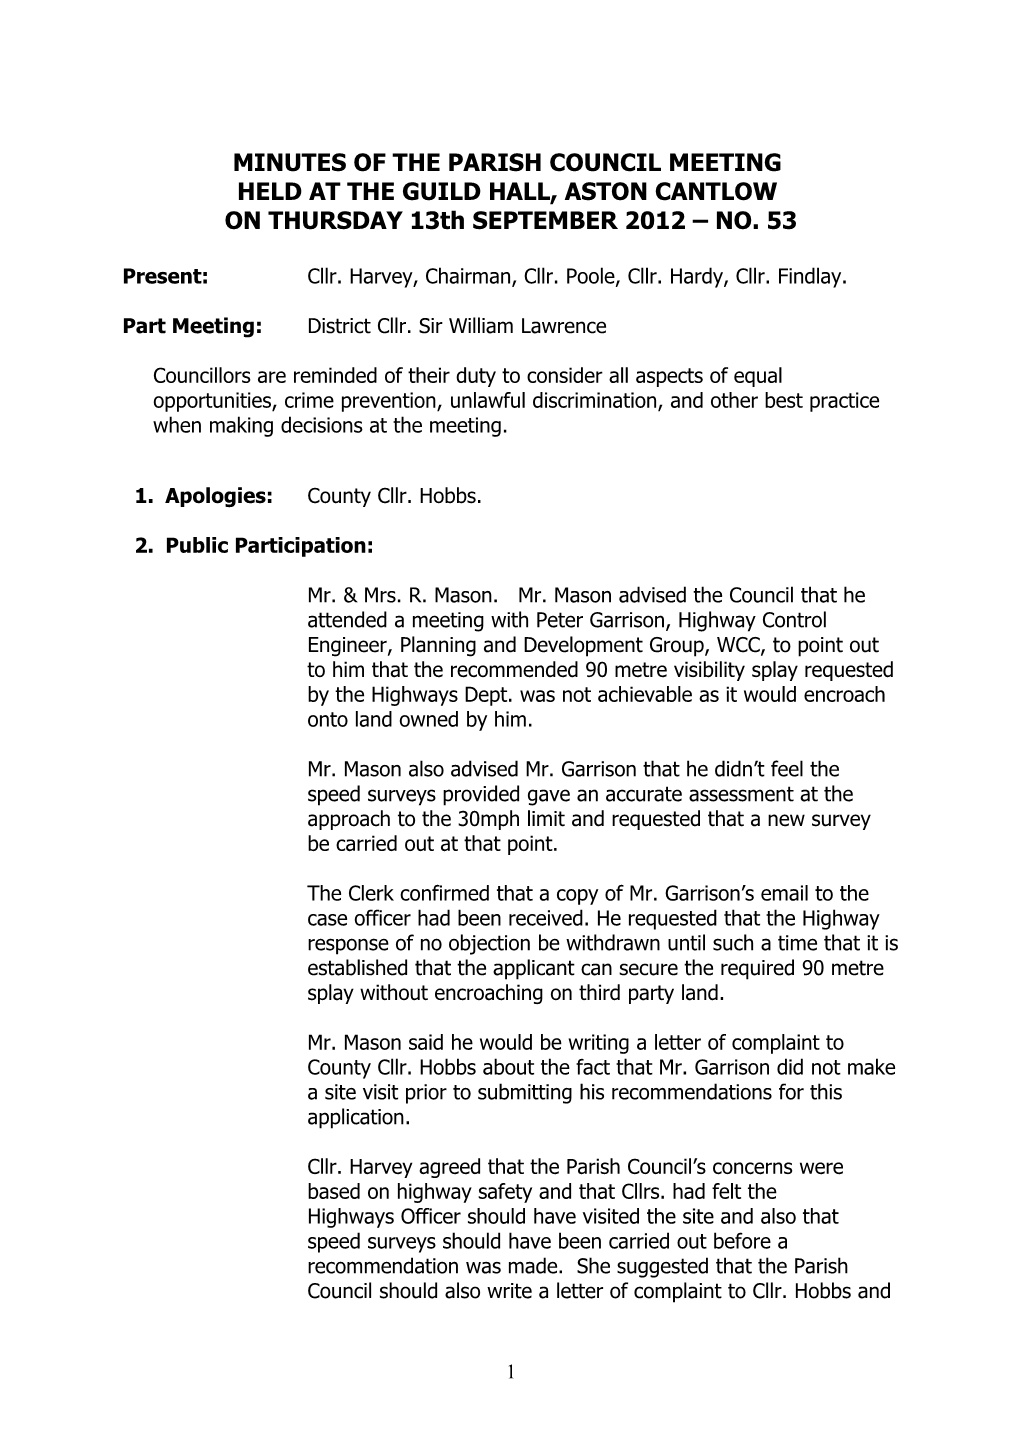 Minutes of the Parish Council Meeting s5